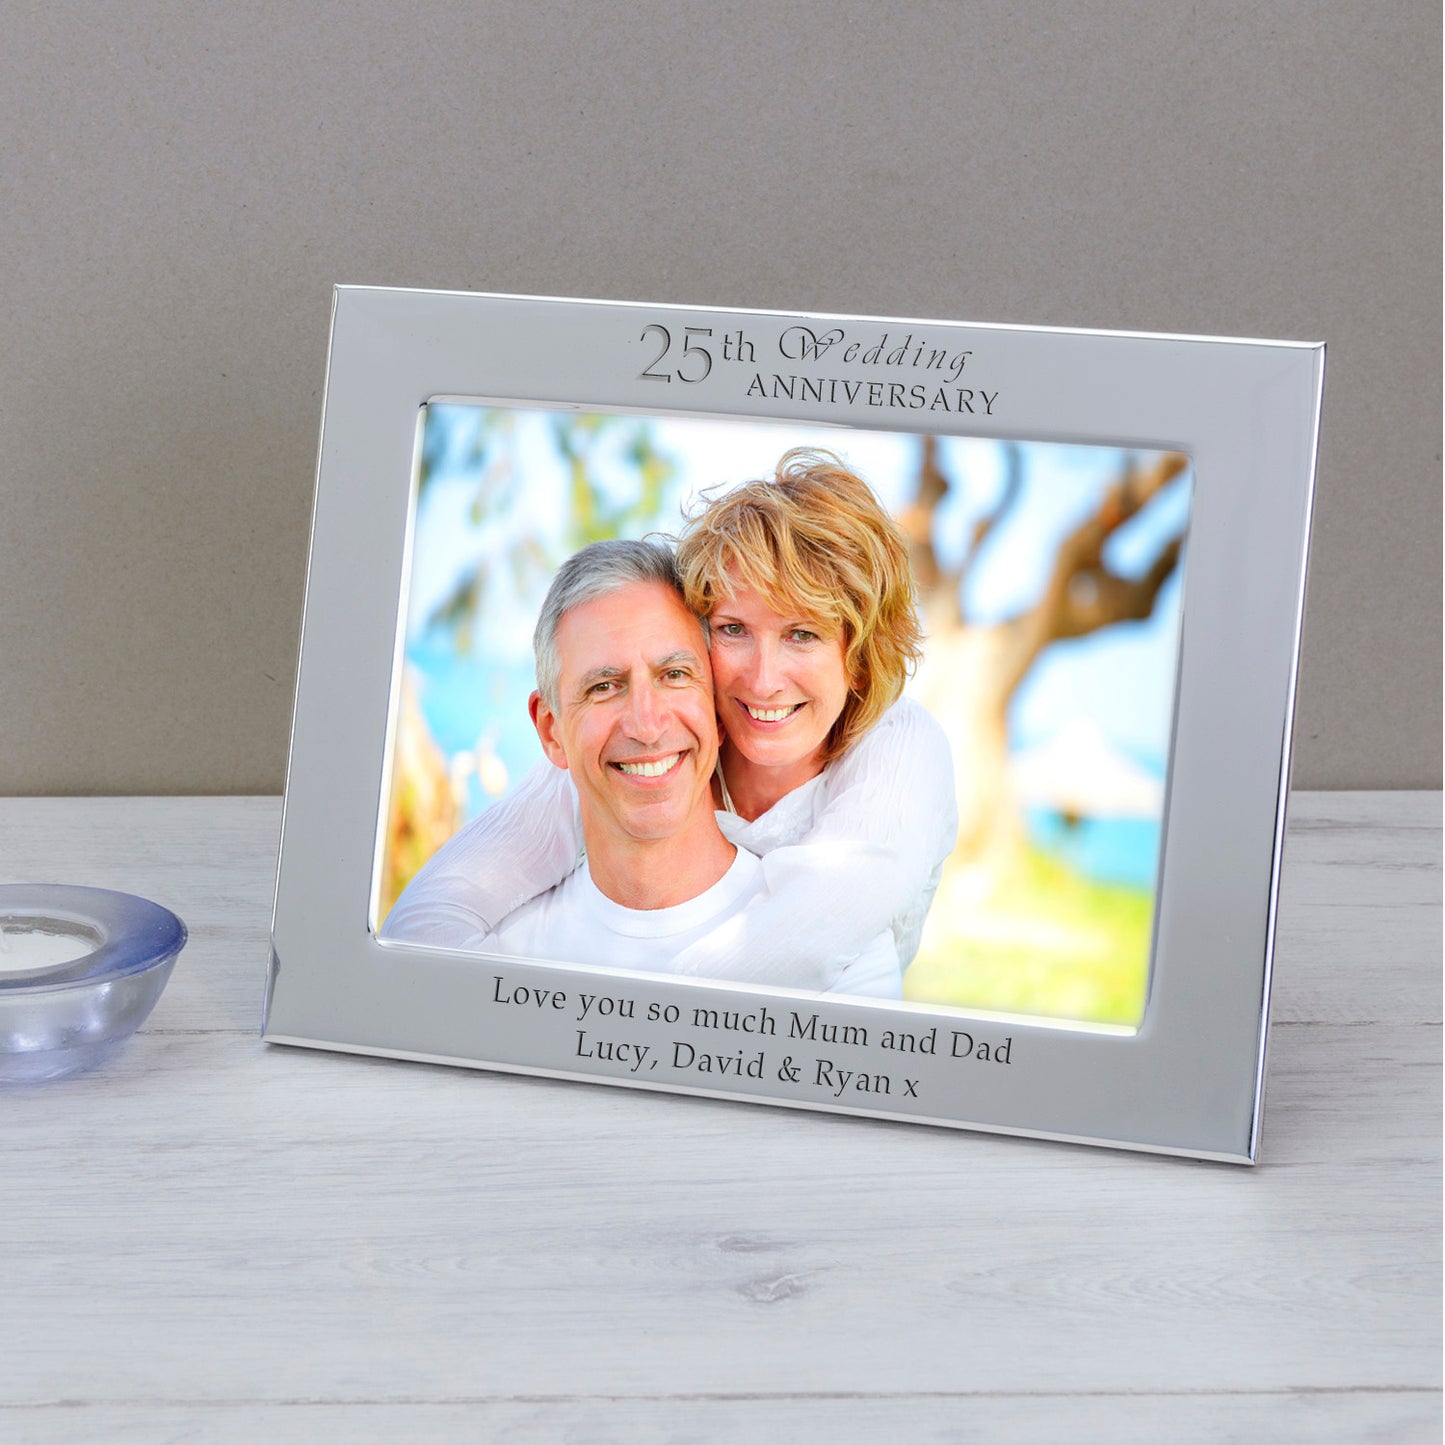 Personalised 25th Wedding ANNIVERSARY Silver Plated Photo Frame